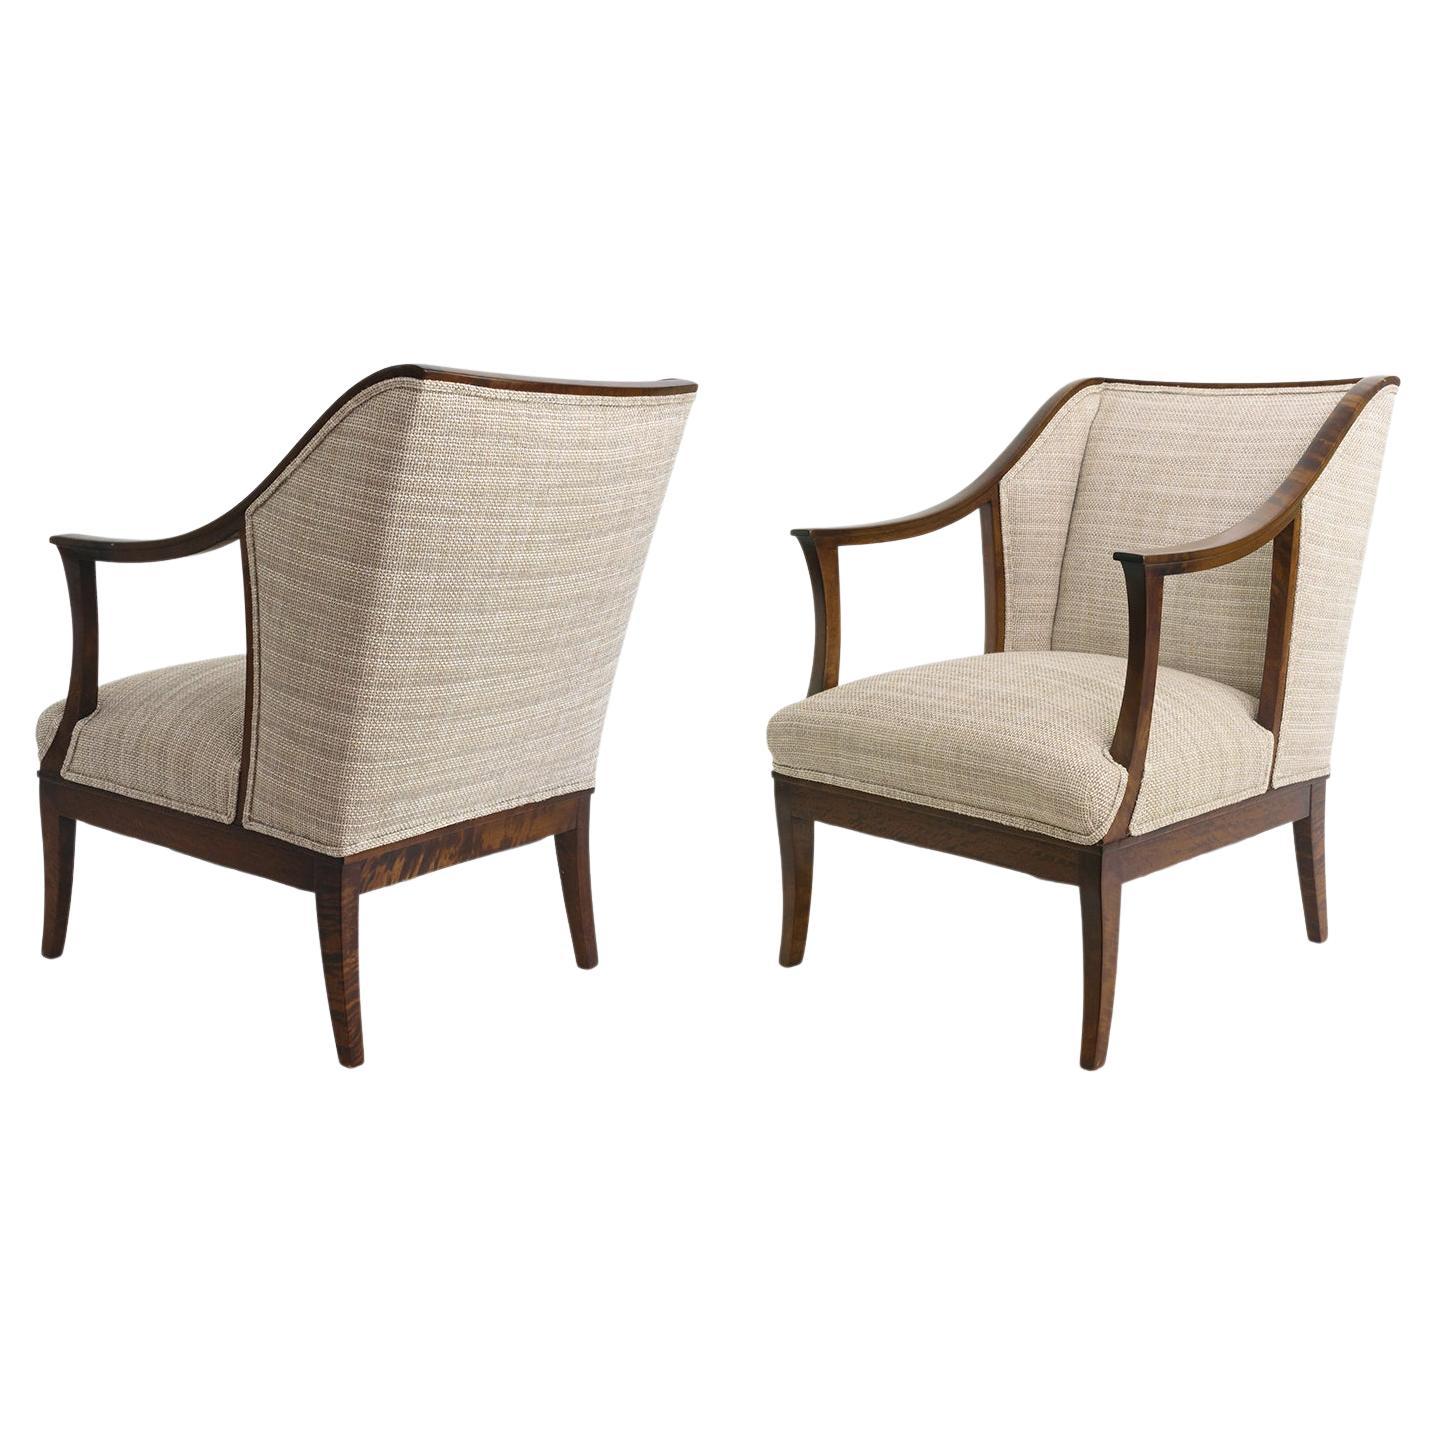 Swedish Armchairs in Stained Solid Birch, by SFM Bodafors, circa 1930 For Sale